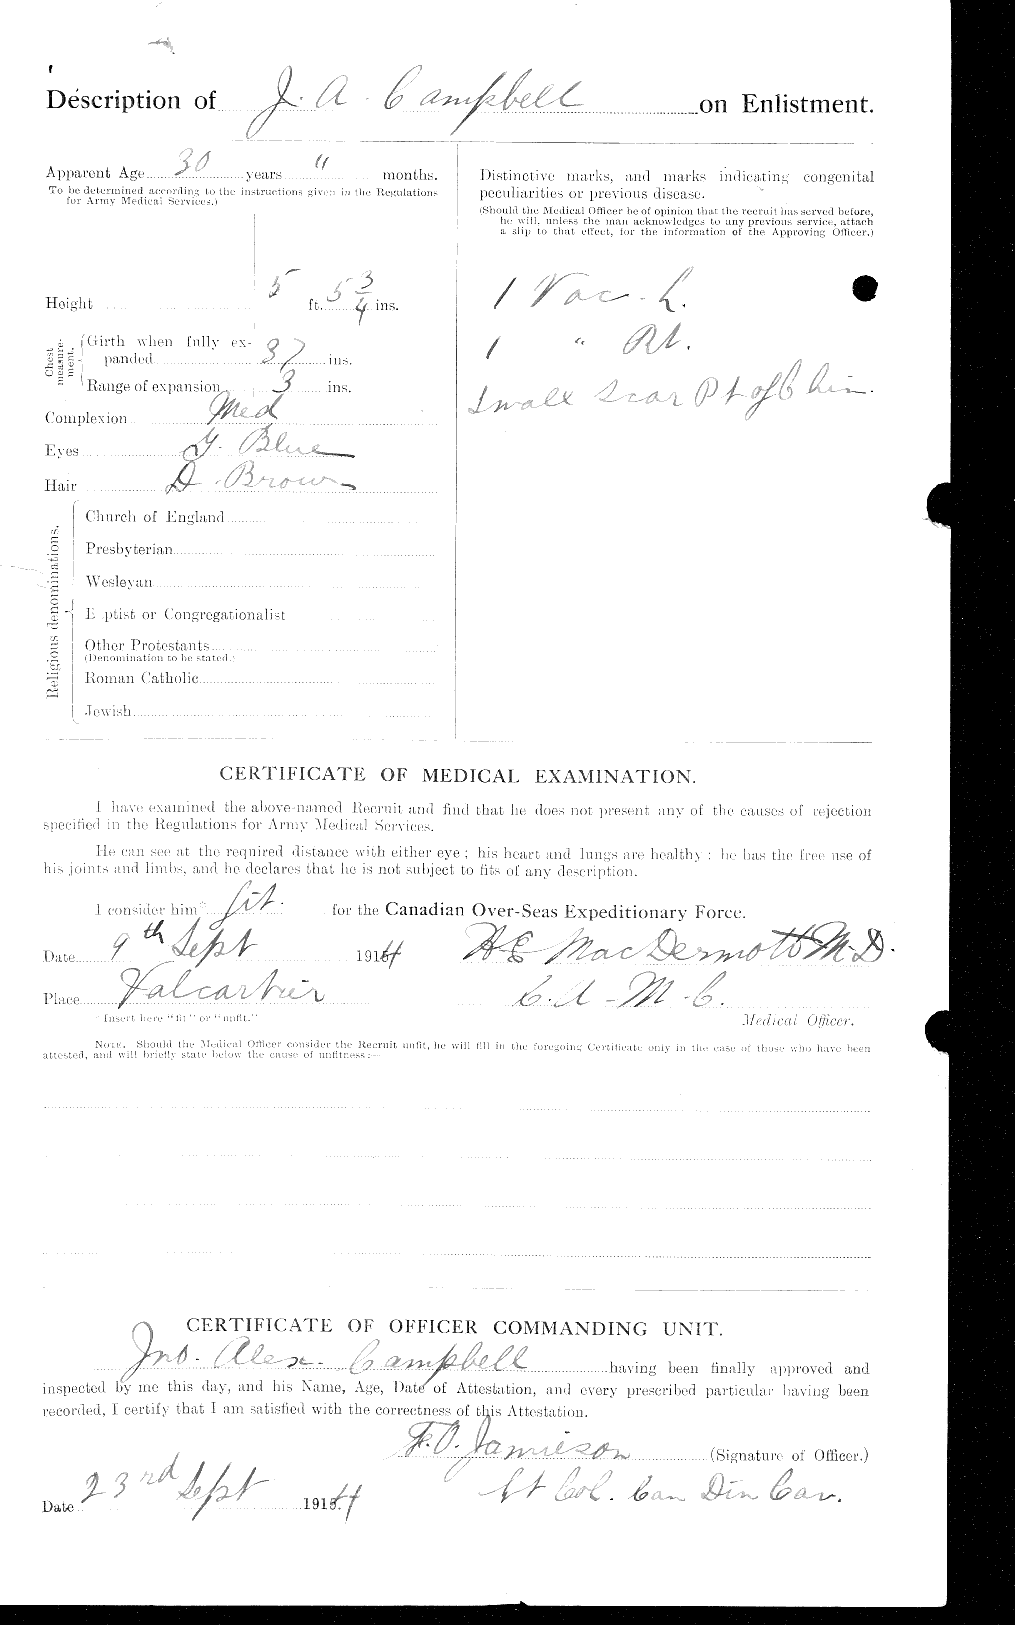 Personnel Records of the First World War - CEF 006852b